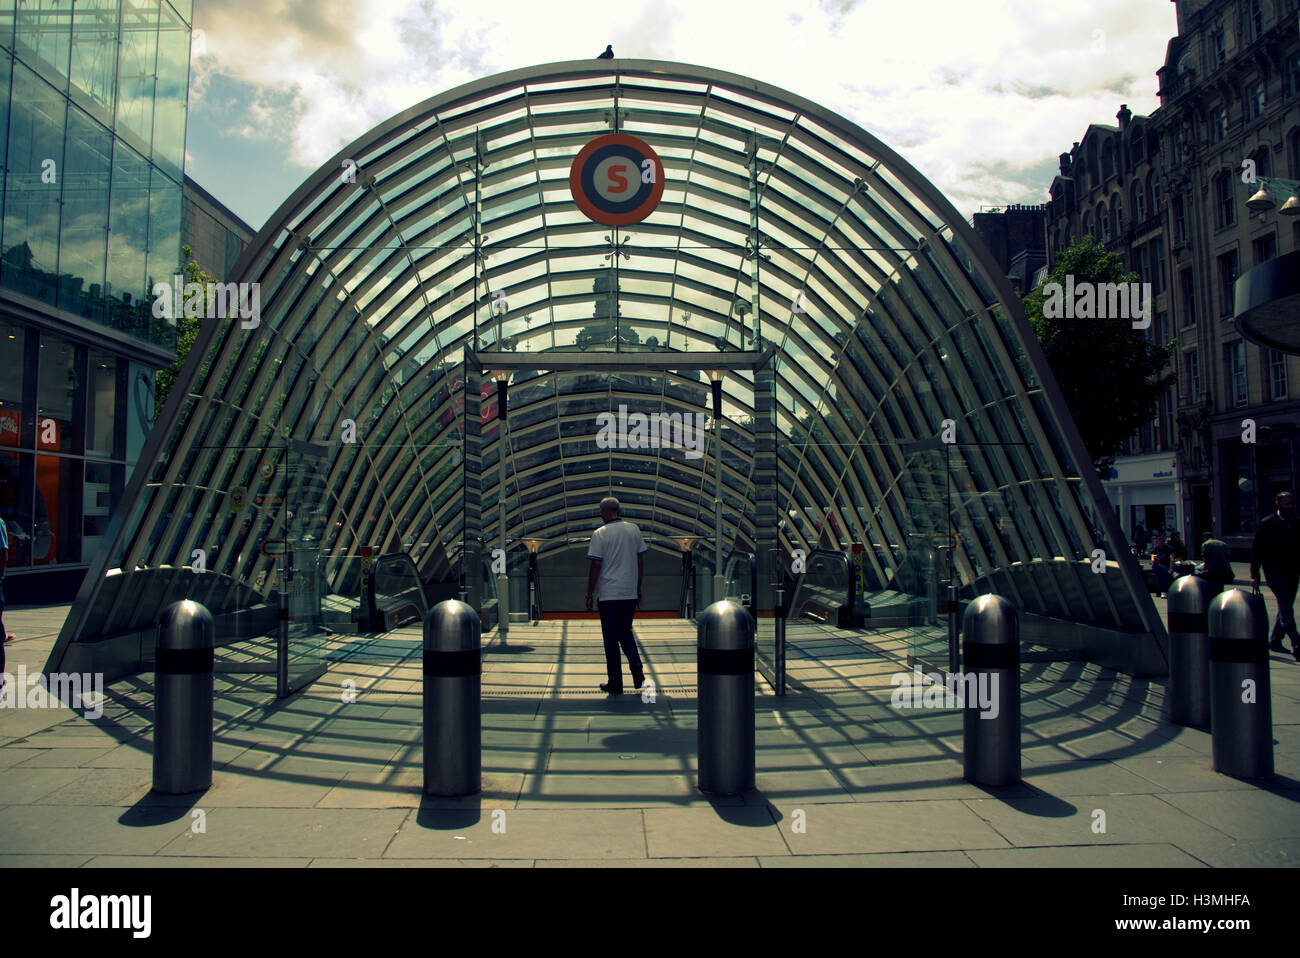 Glasgow underground or Subway entrance to st enoch station sunny Stock Photo